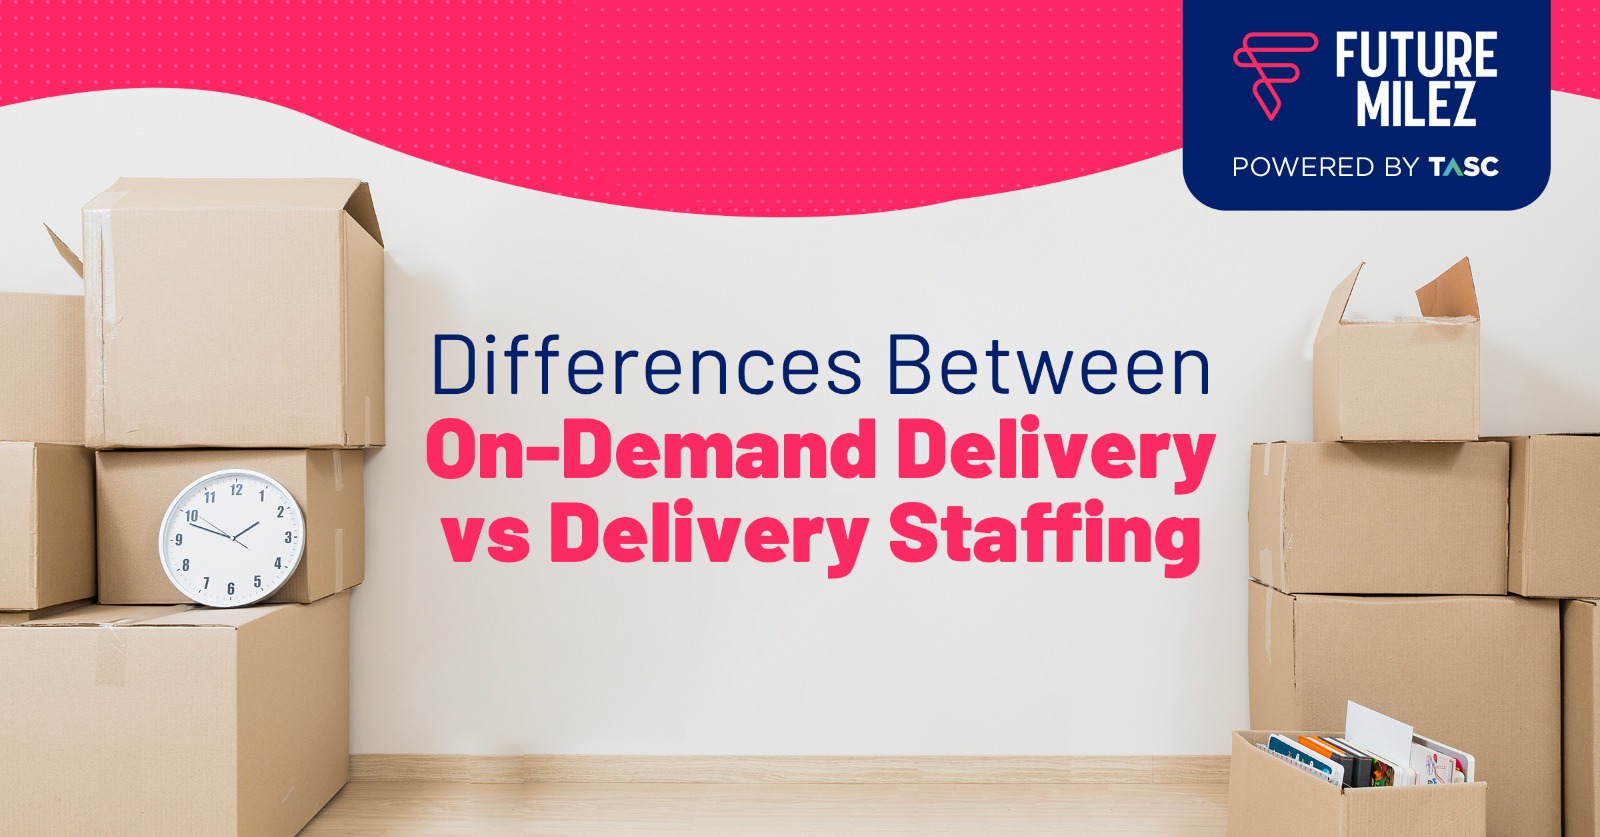 Differences Between On-Demand Delivery Vs Delivery Staffing